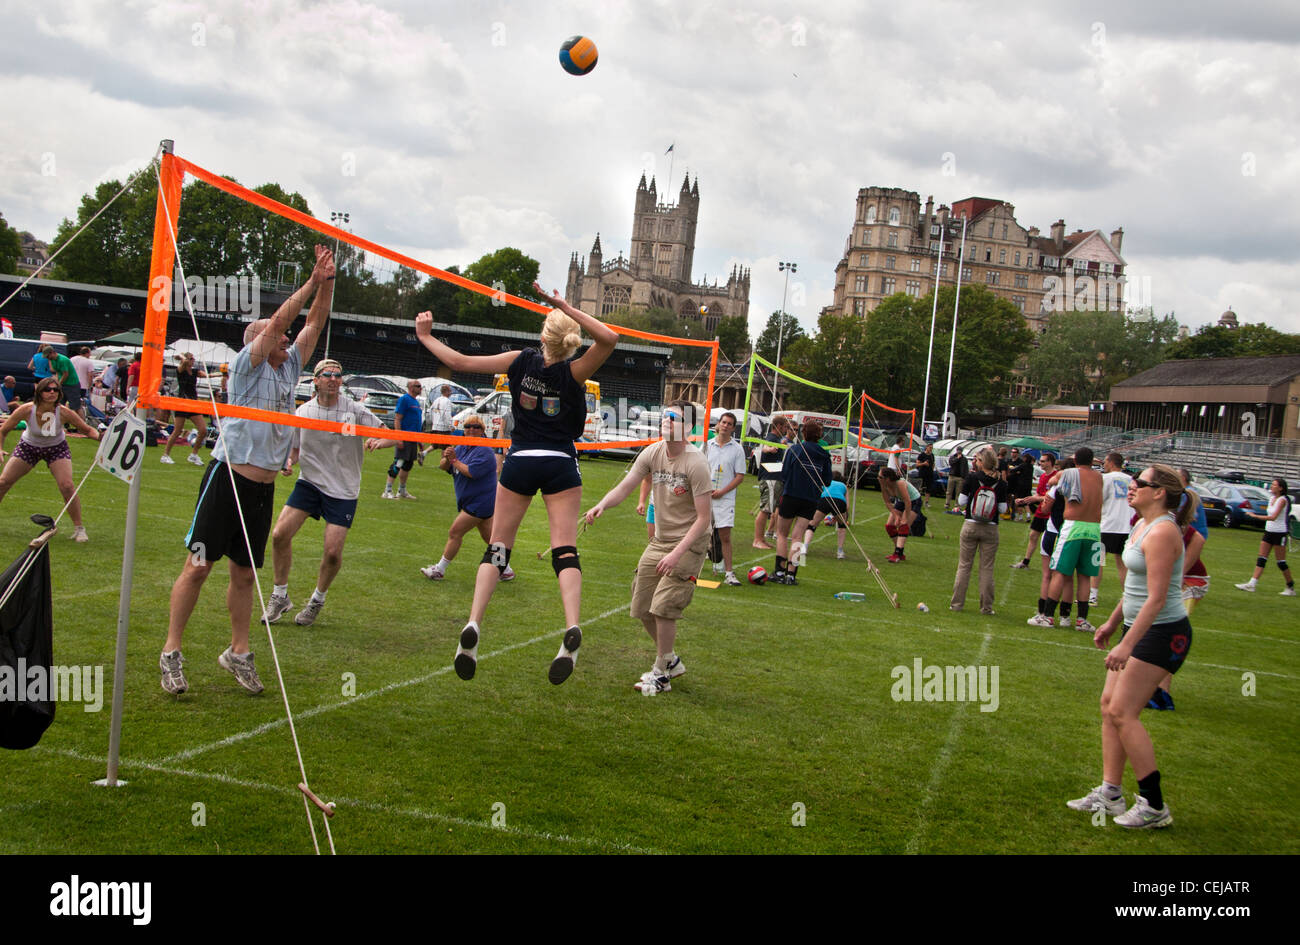 Teams competing in the 37th annual  Whitefield international Volleyball championships; Bath, July 2011. Stock Photo